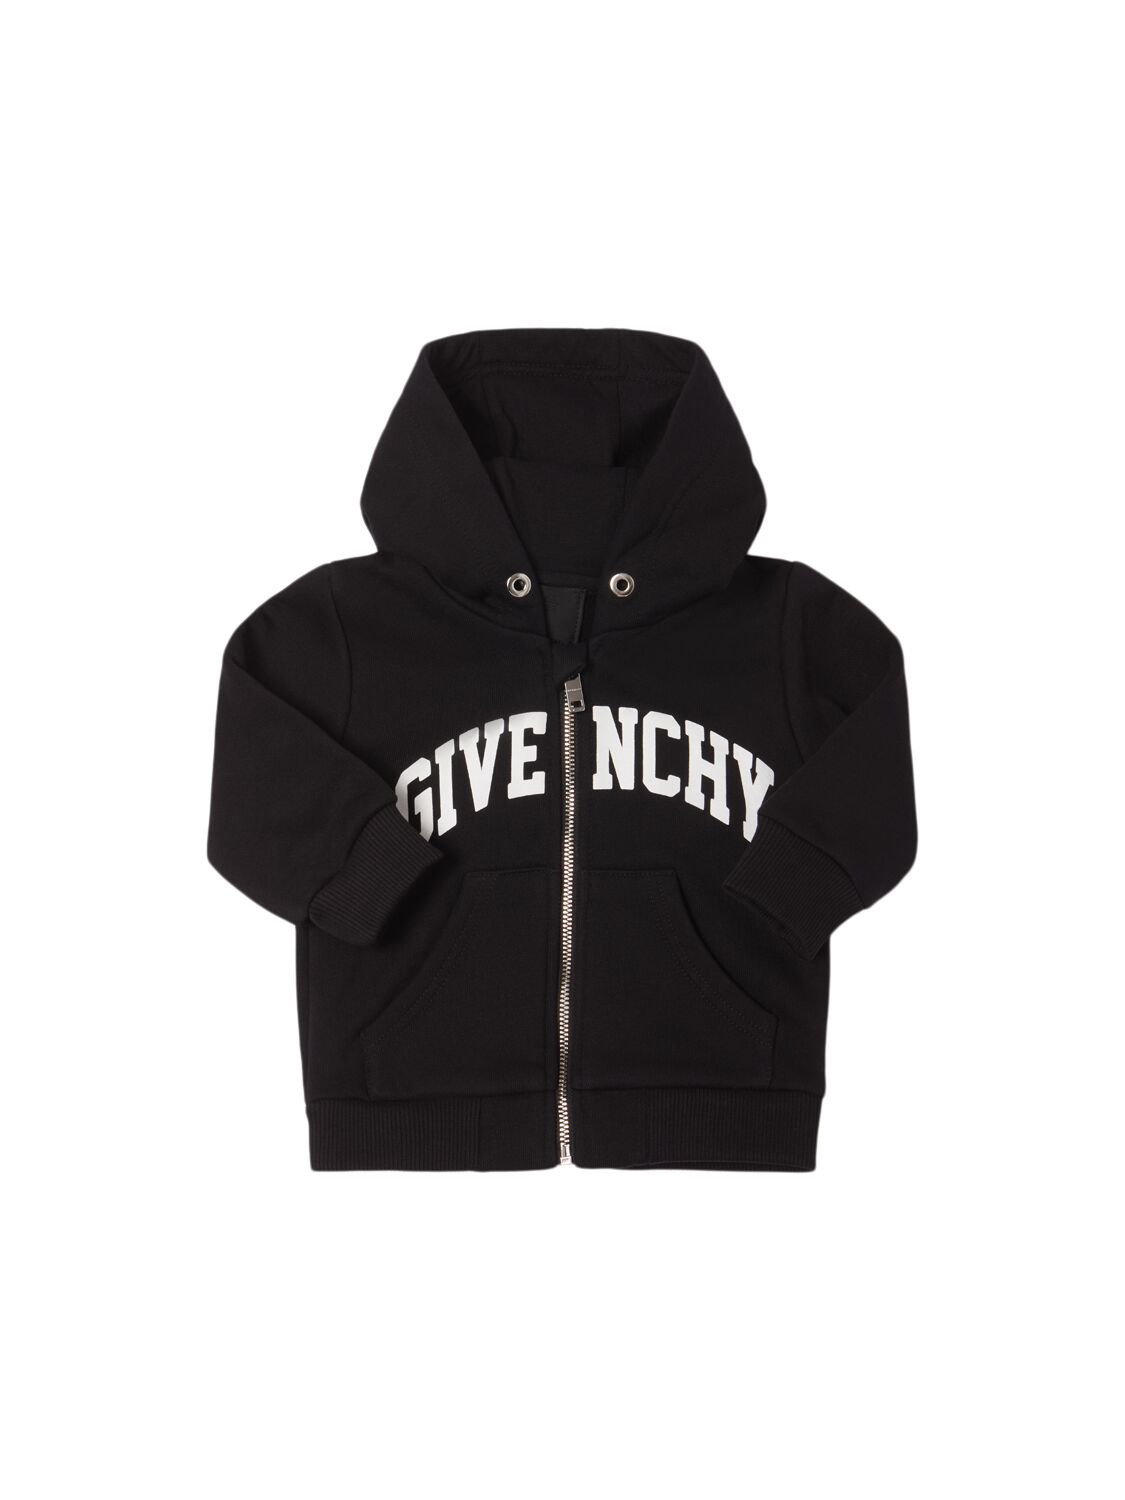 Givenchy Printed Cotton Blend Zip-up Sweatshirt In Black